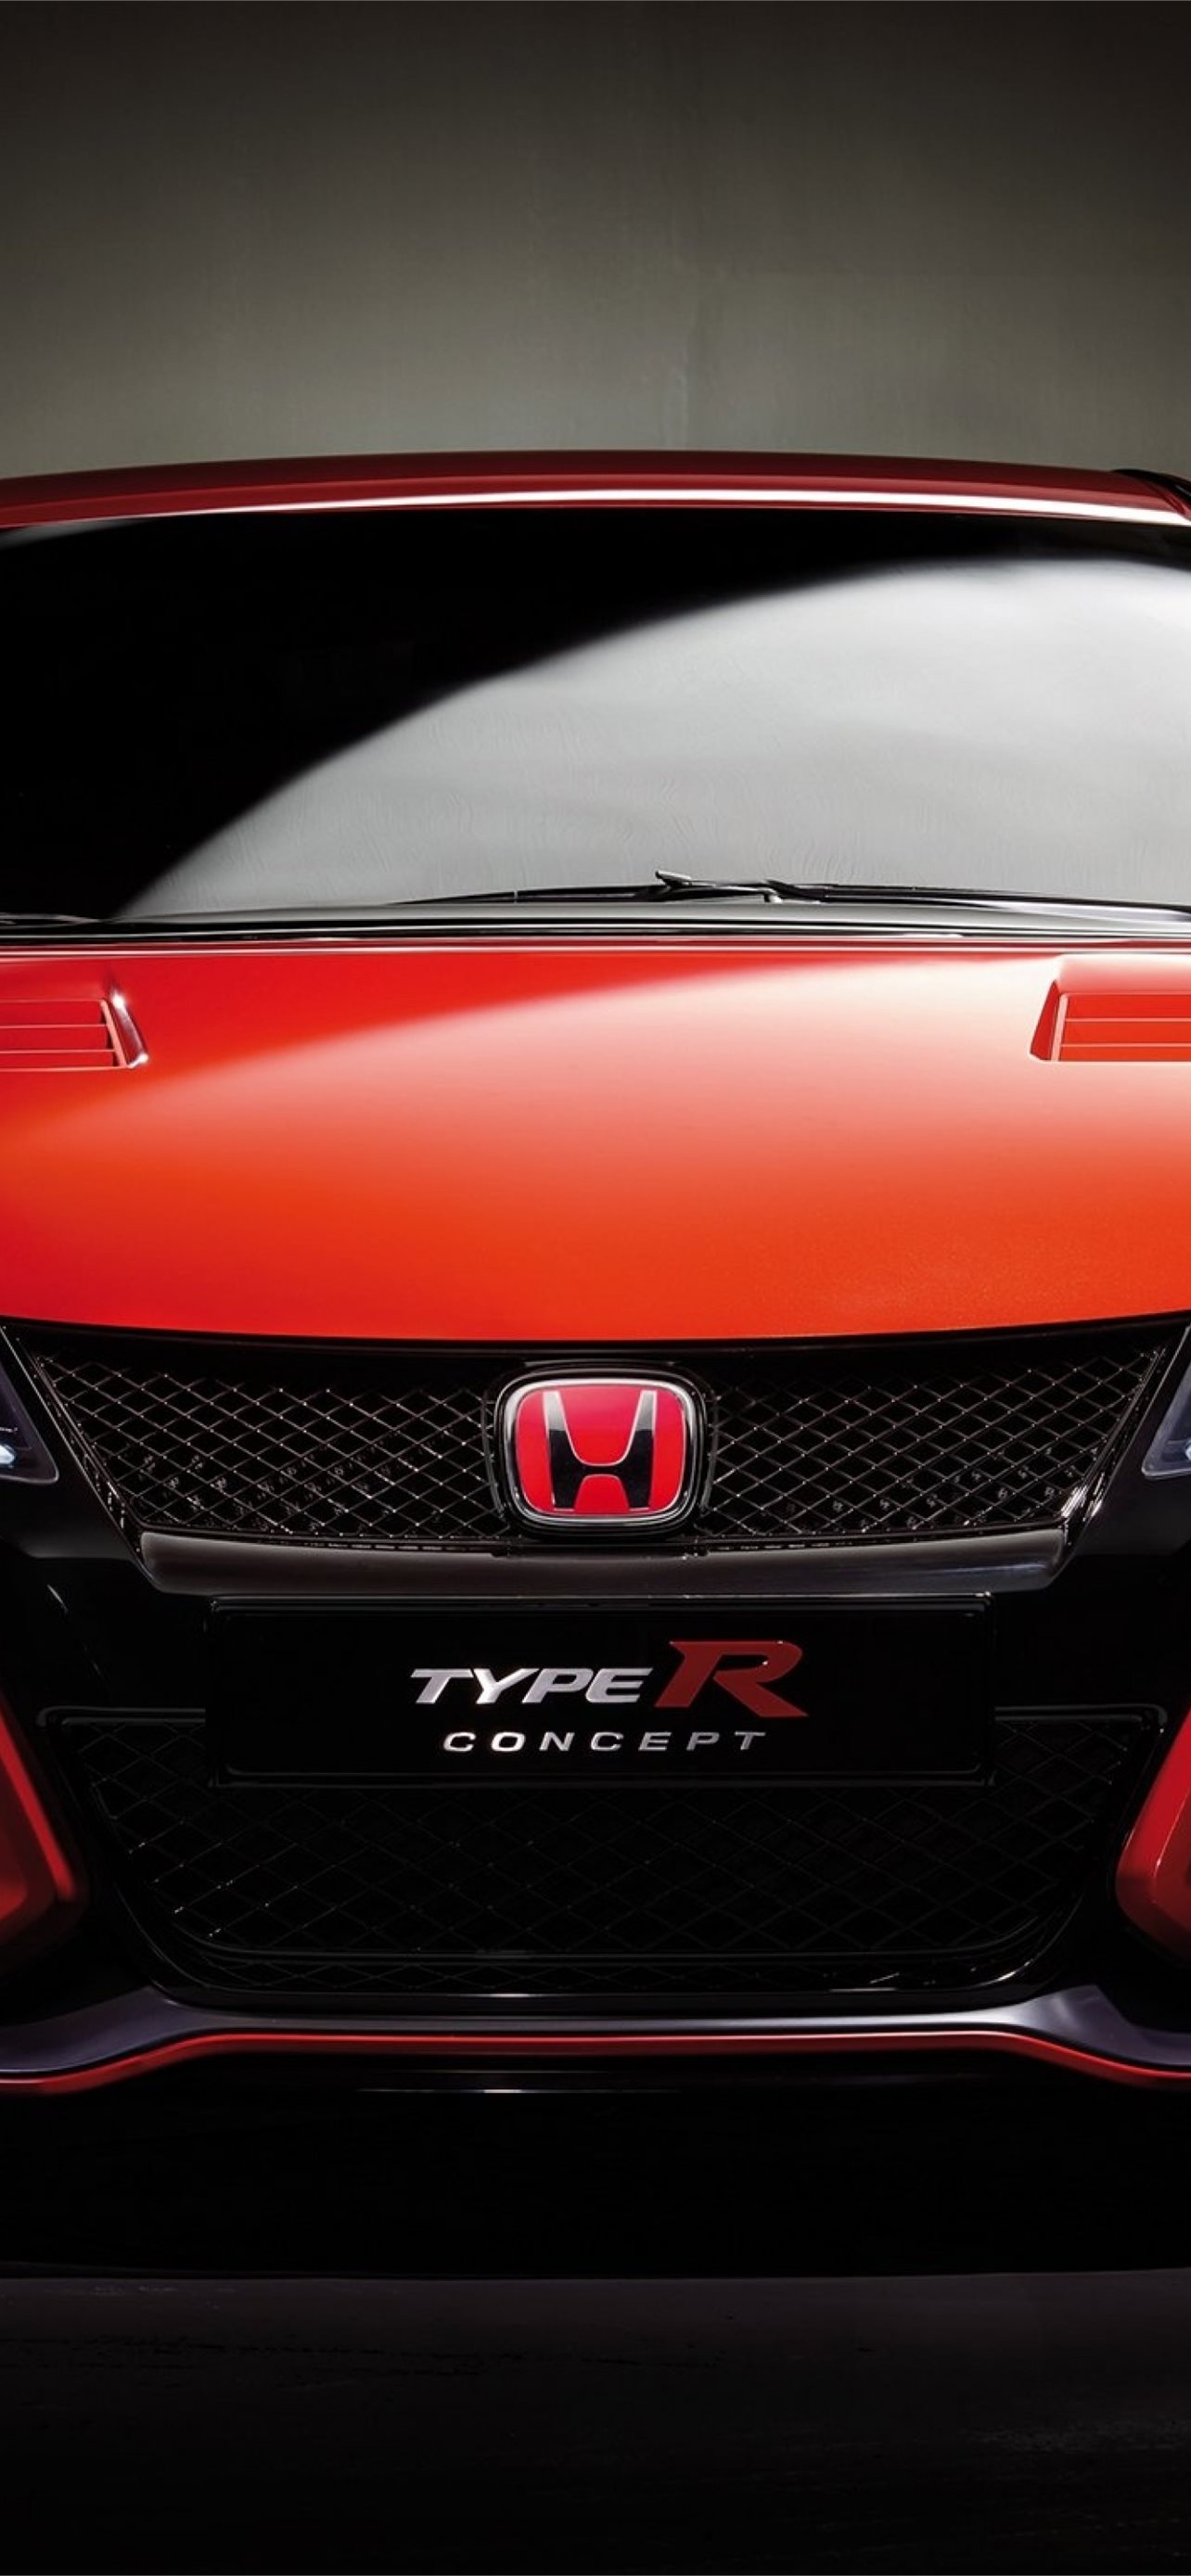 Honda Civic Type R Red Cars Front View Honda Civic Iphone Wallpapers Free Download